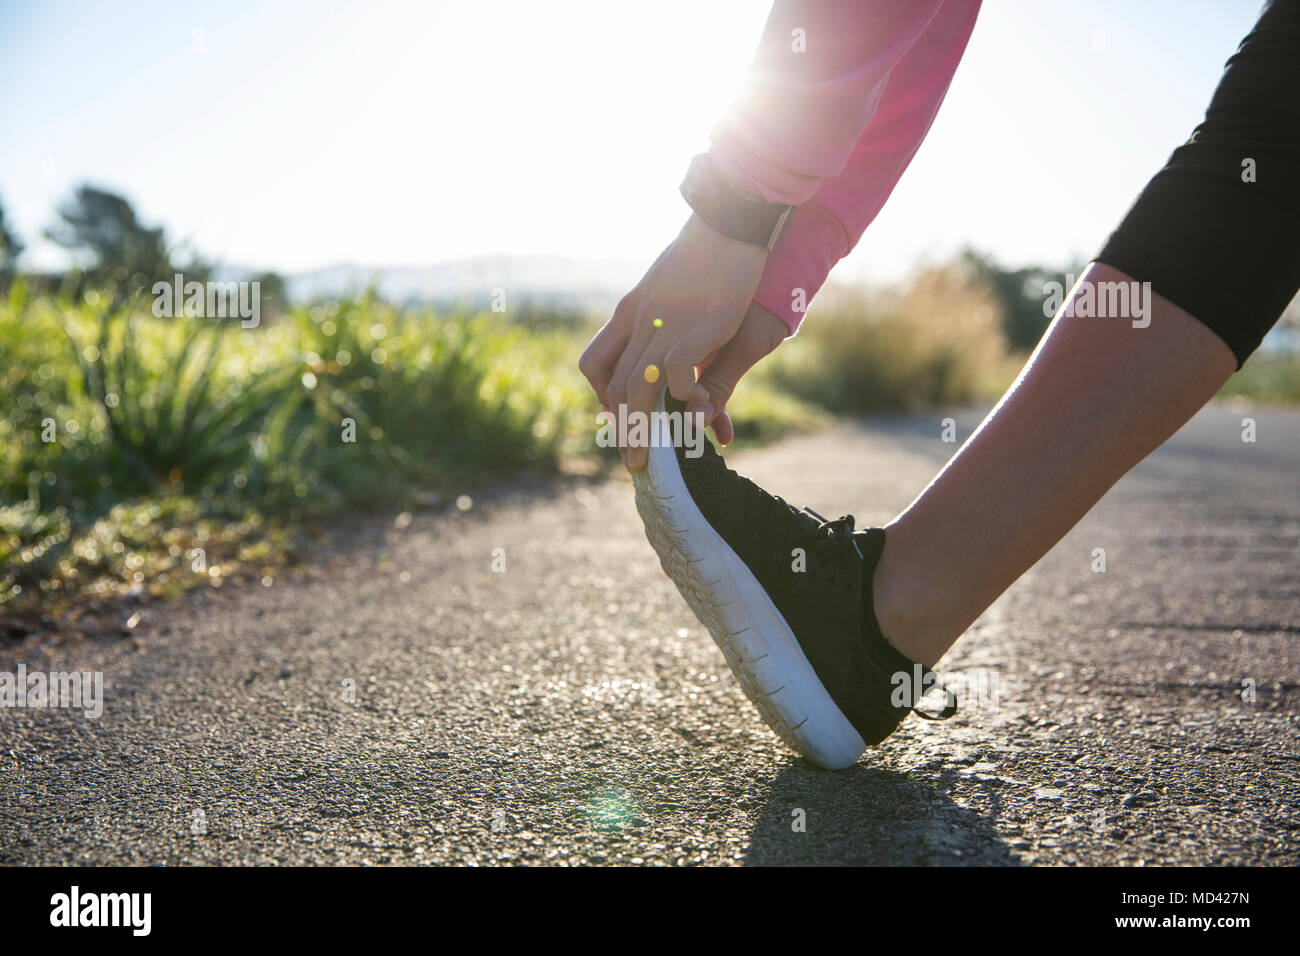 Young woman exercising in rural setting, stretching leg, low section Stock Photo